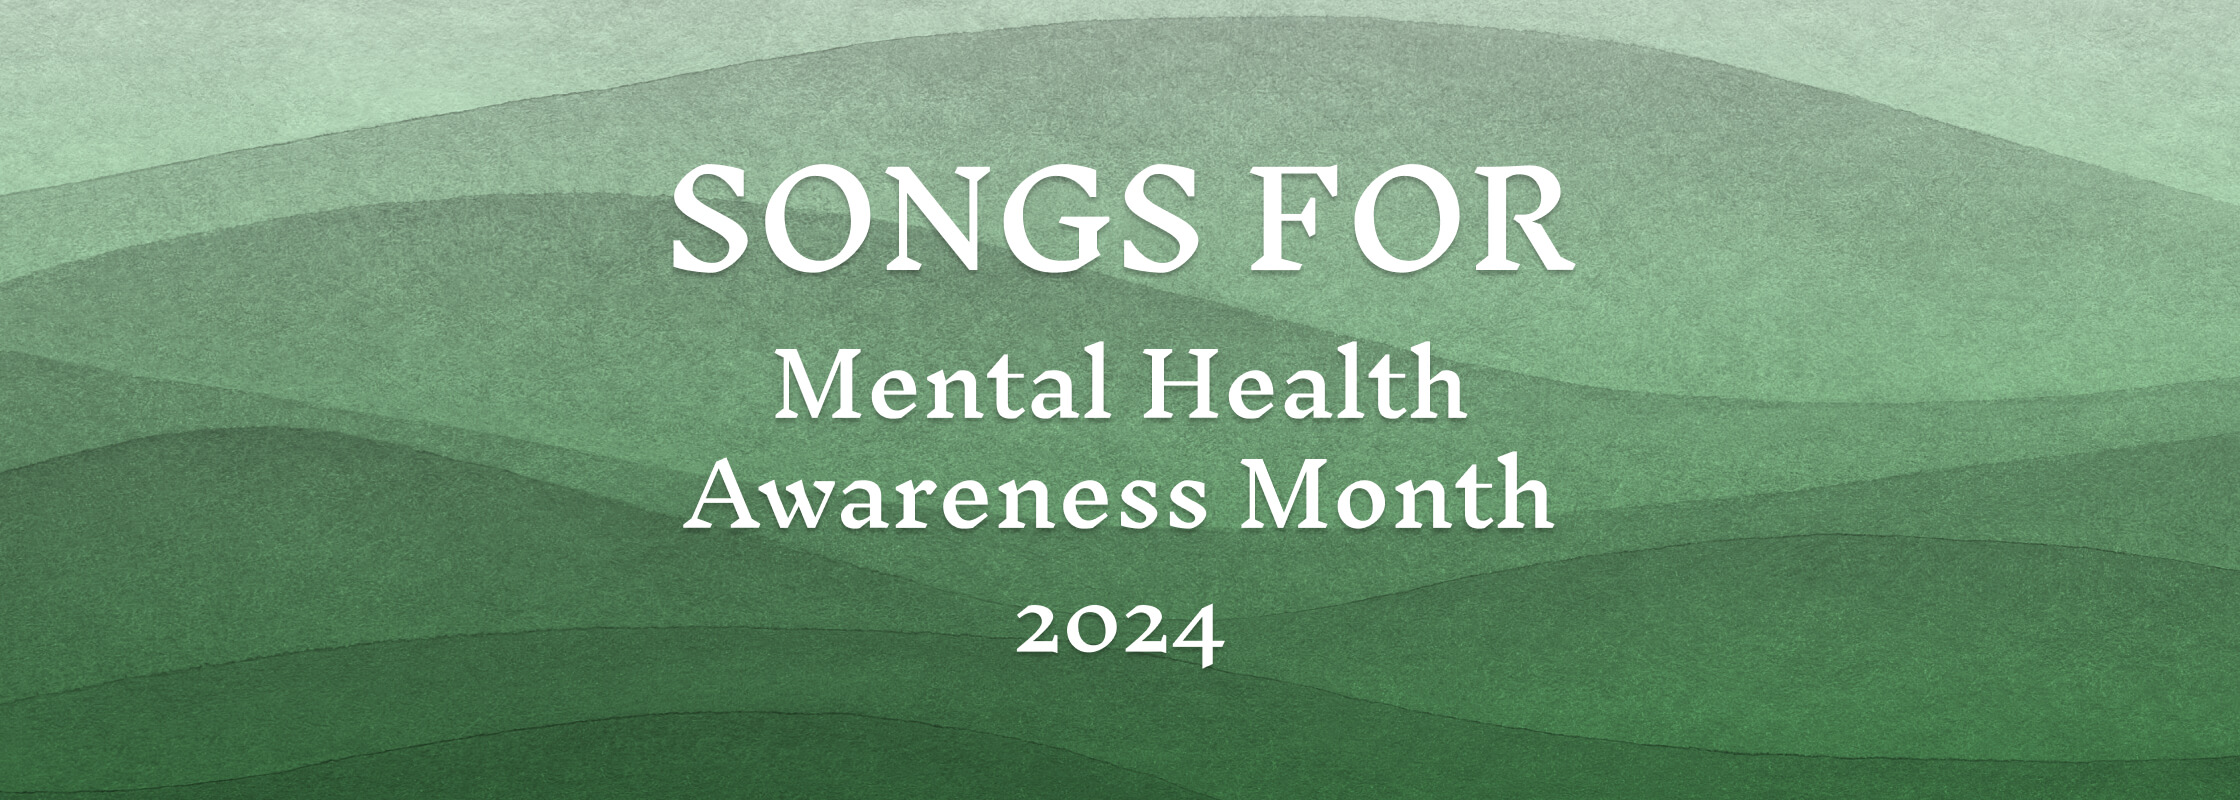 Songs for Mental Health Awareness Month 2024